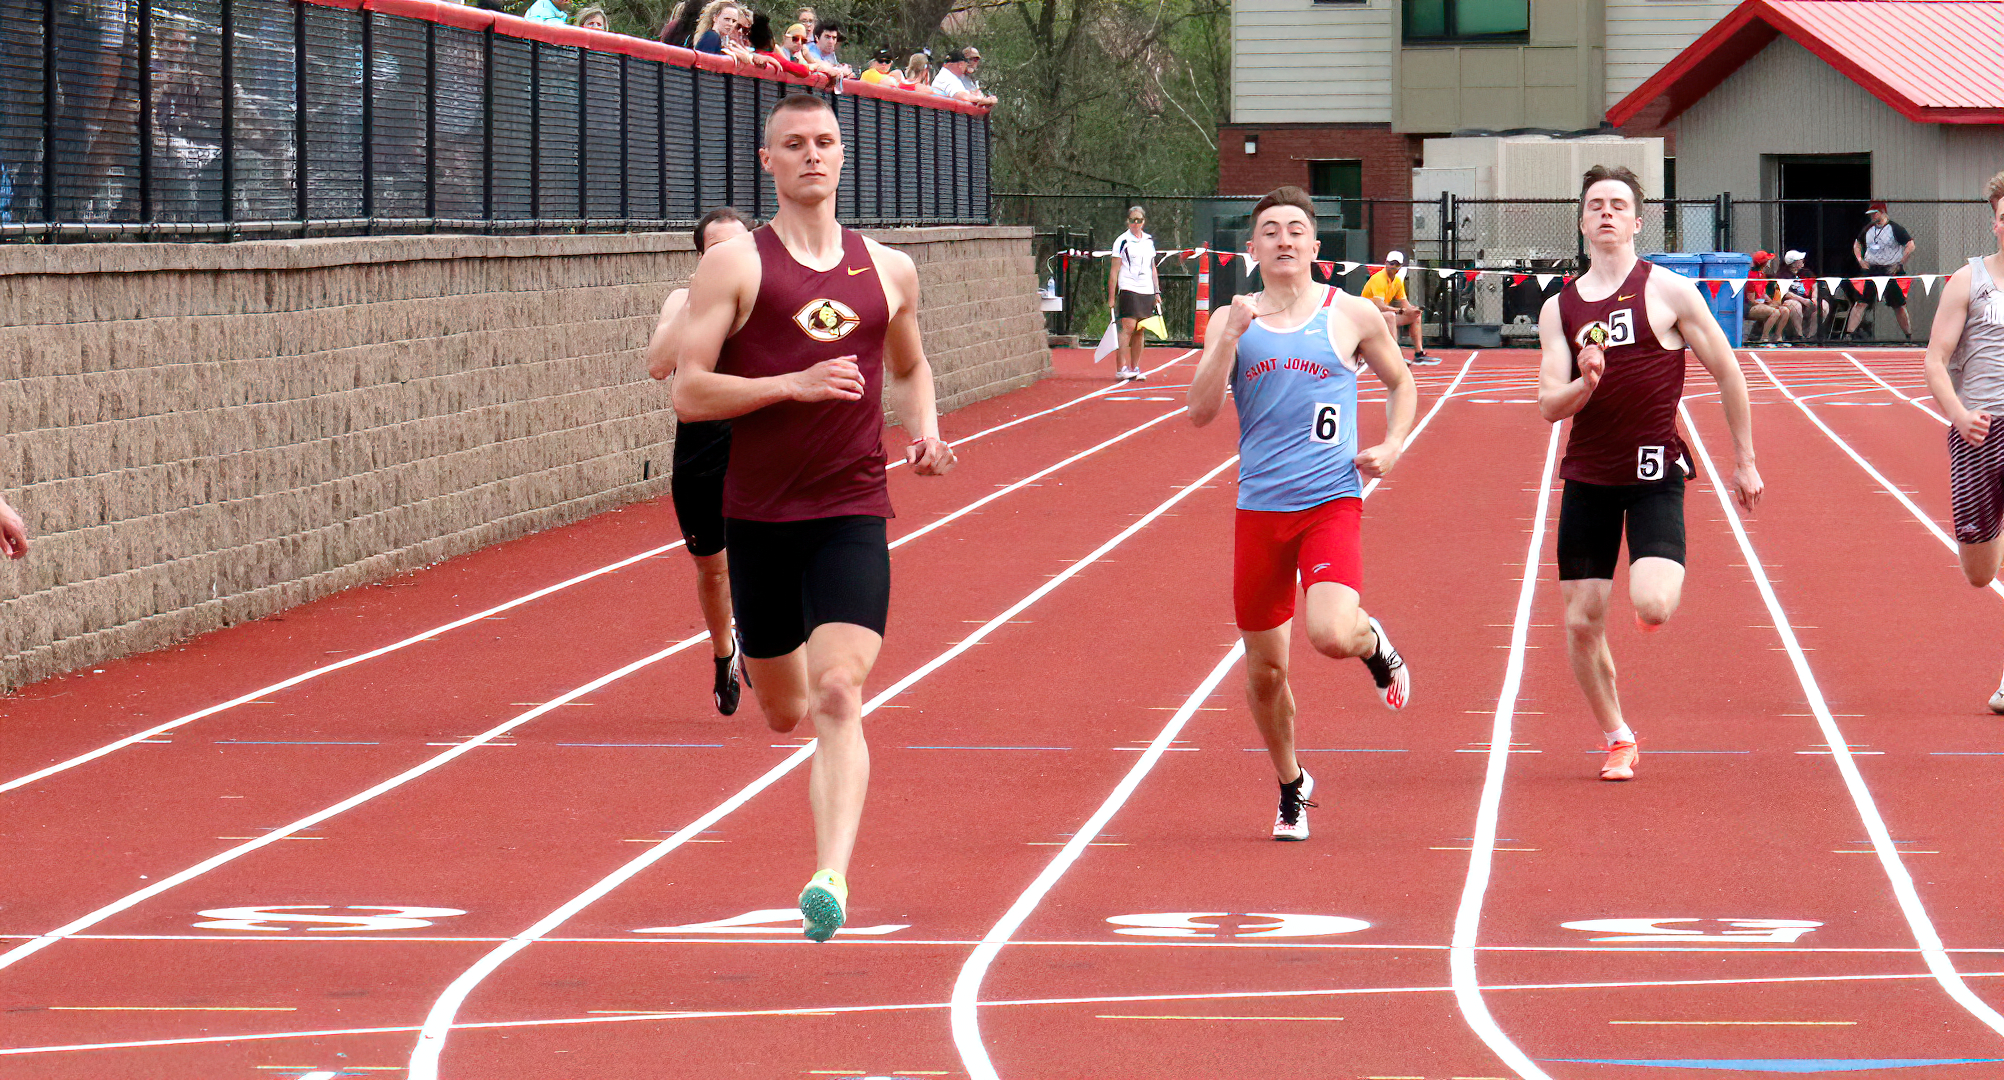 Senior All-American Cal Wright bettered his own school record in the 400 meters at the UW-La Crosse NCAA Qualifier.